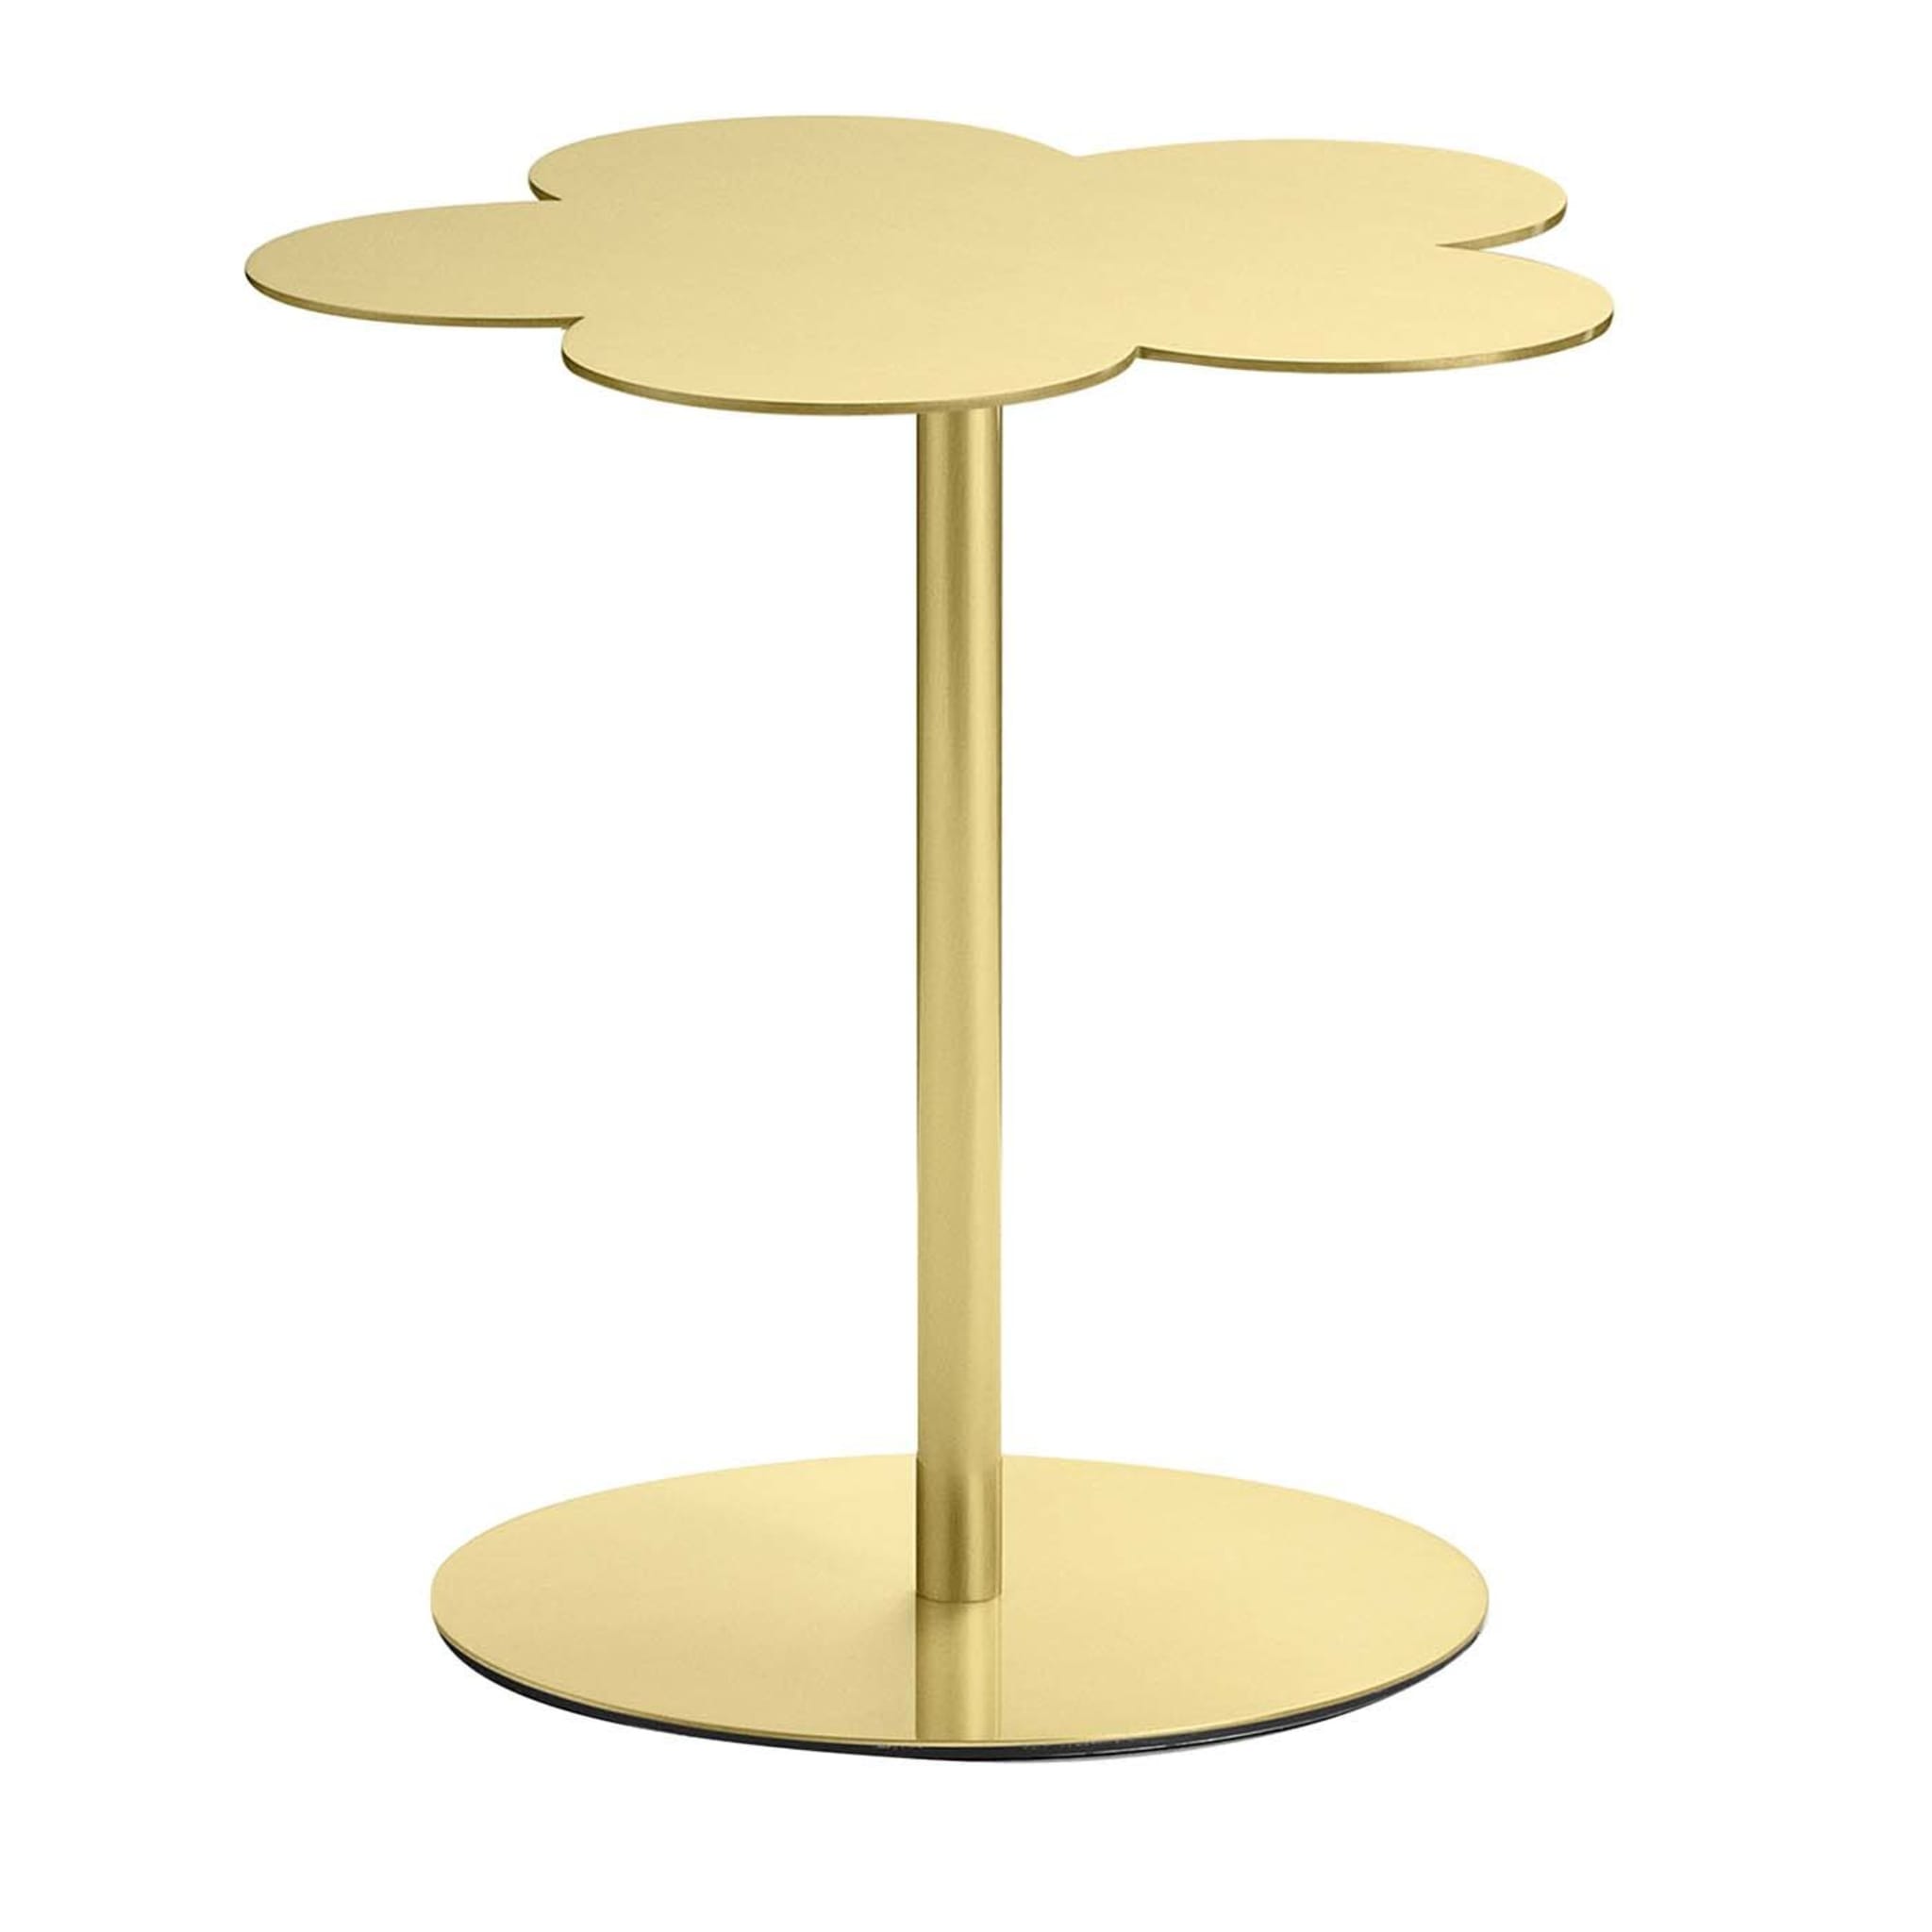 Flowers Small Brass Side Table by Stefano Giovannoni - Main view